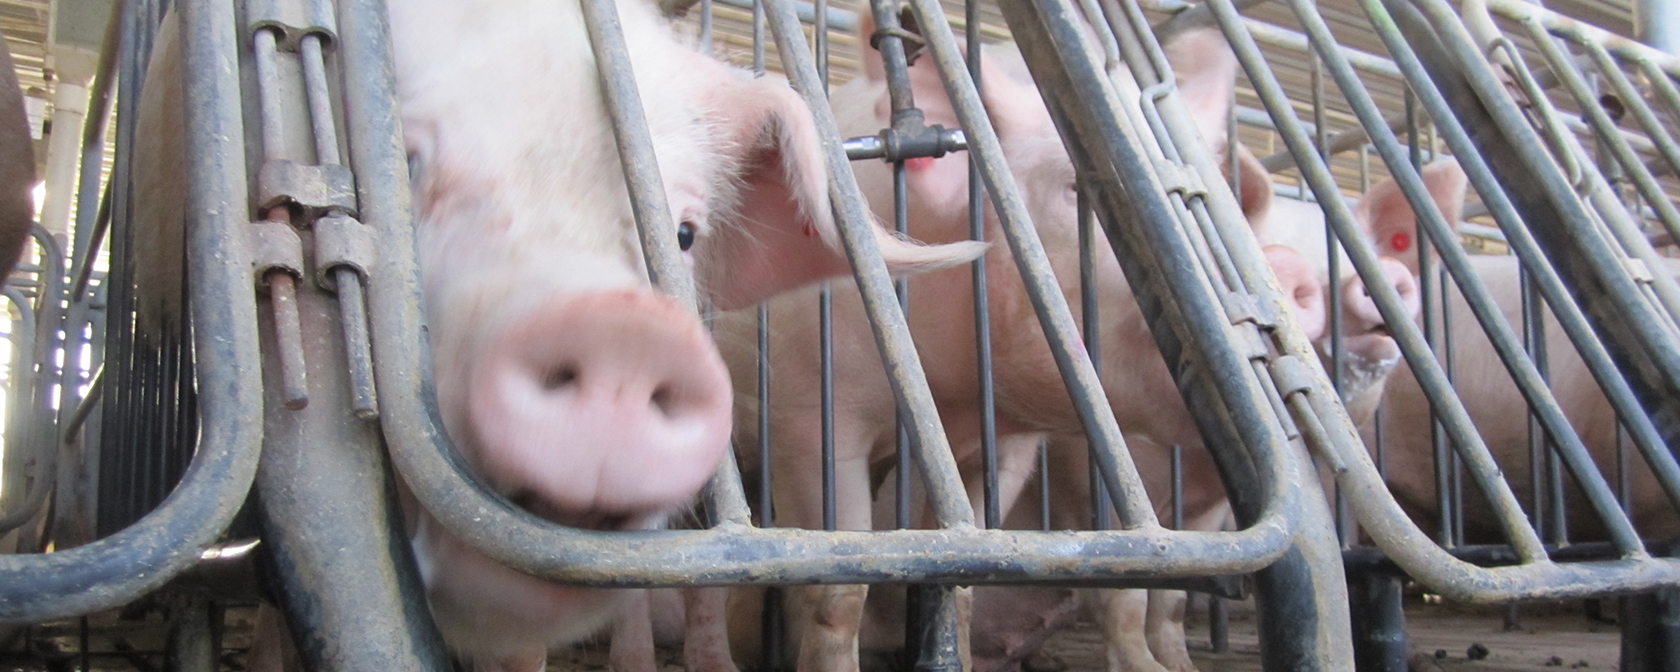 Breaking: Threat to nation’s strongest farm animal law deepens in U.S. Congress